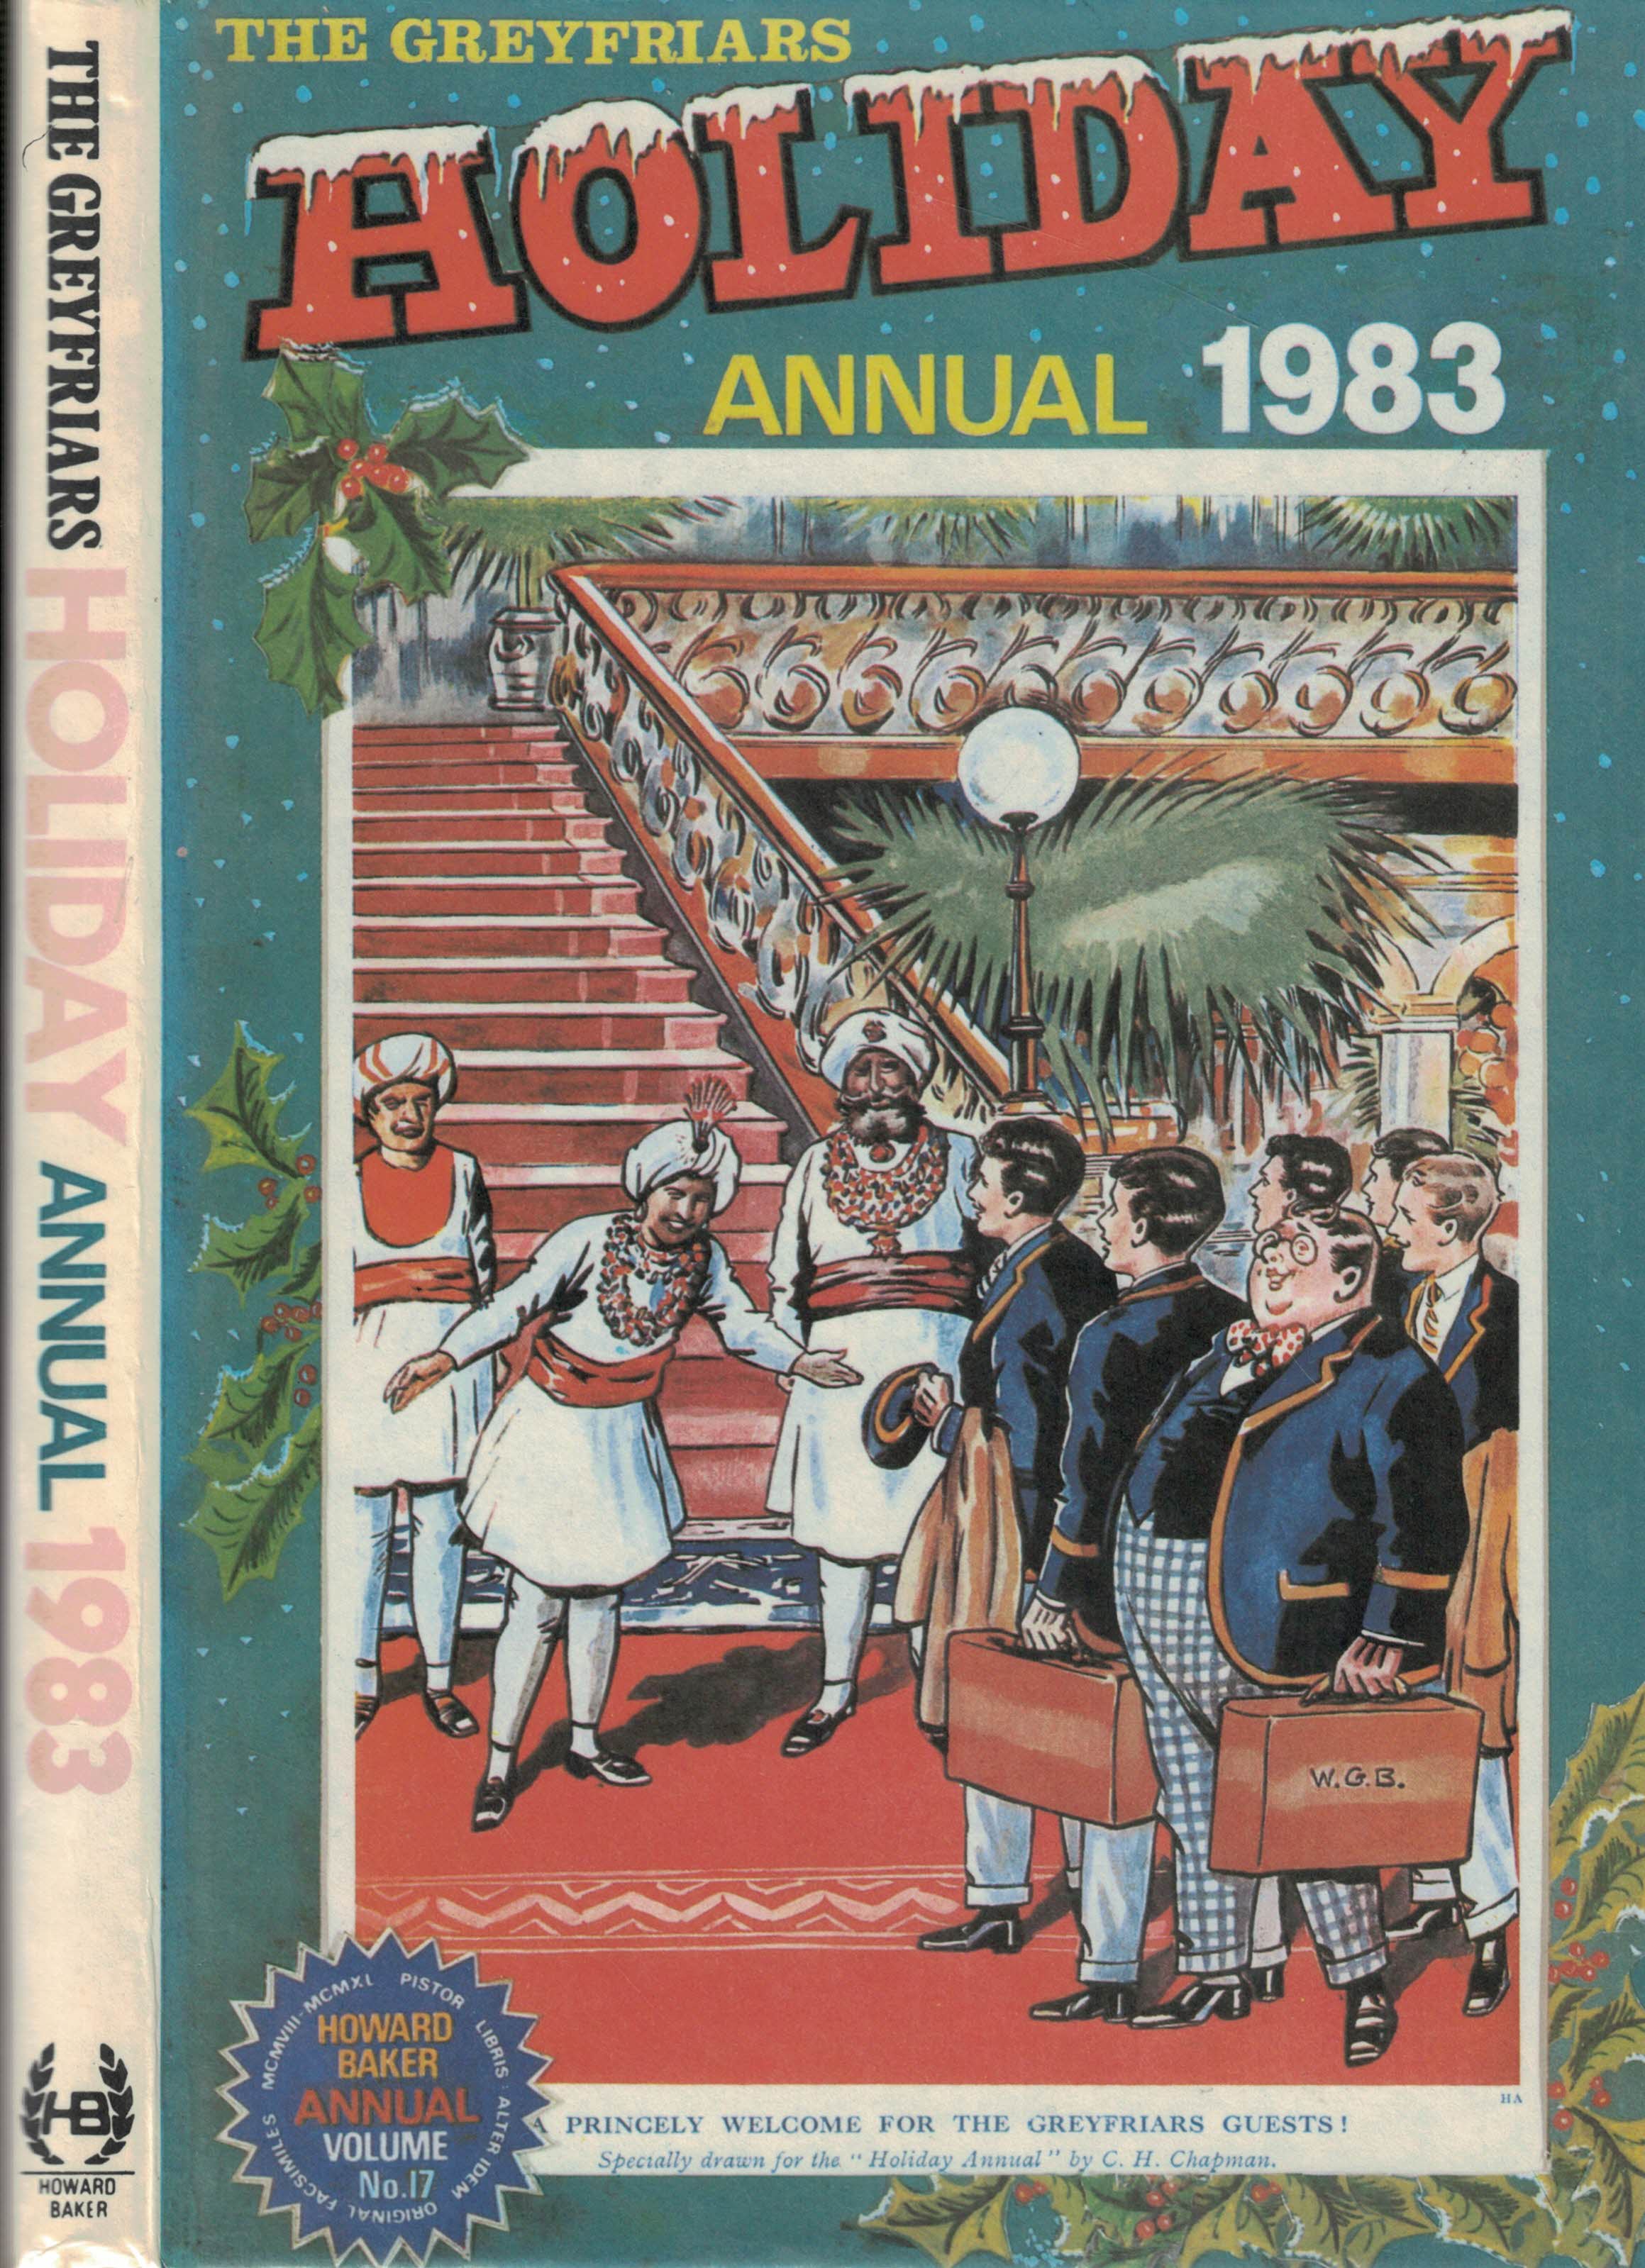 The Greyfriars Holiday Annual 1983